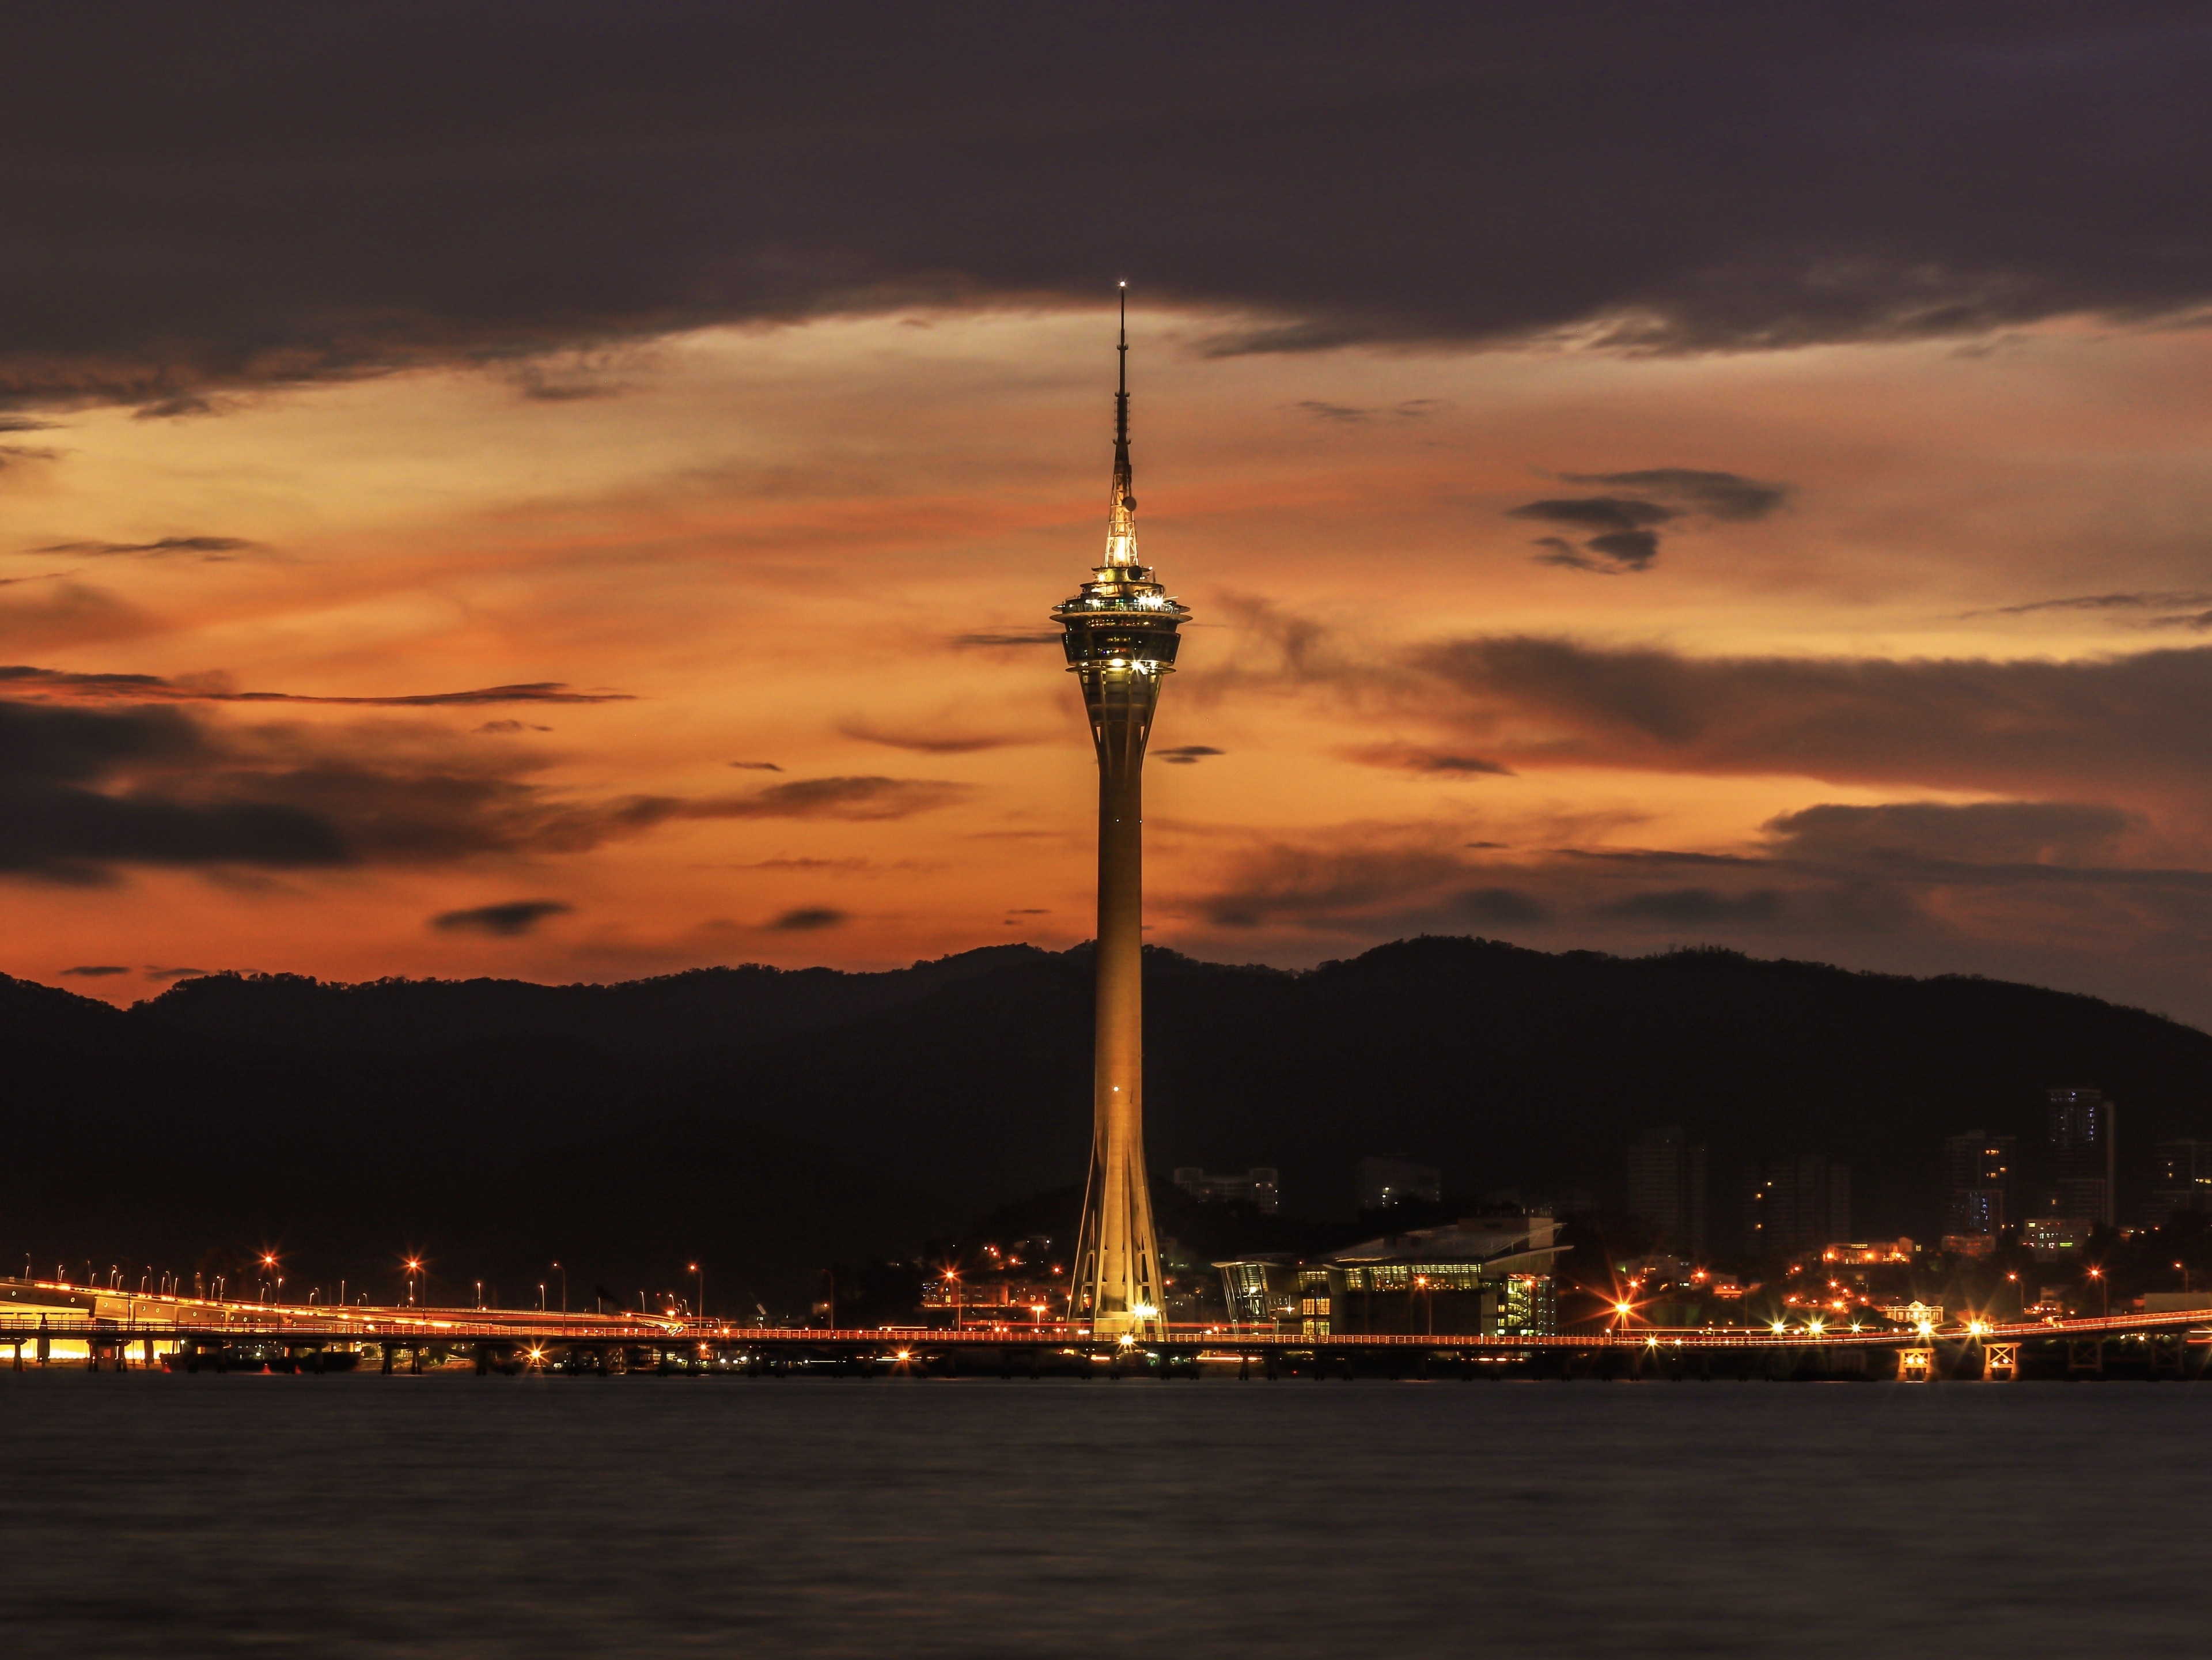 The Macau Tower at Dusk. From the other side of Taipa Island you can capture a classic image of the Macau tower, from sunset, dusk and blue hour time..